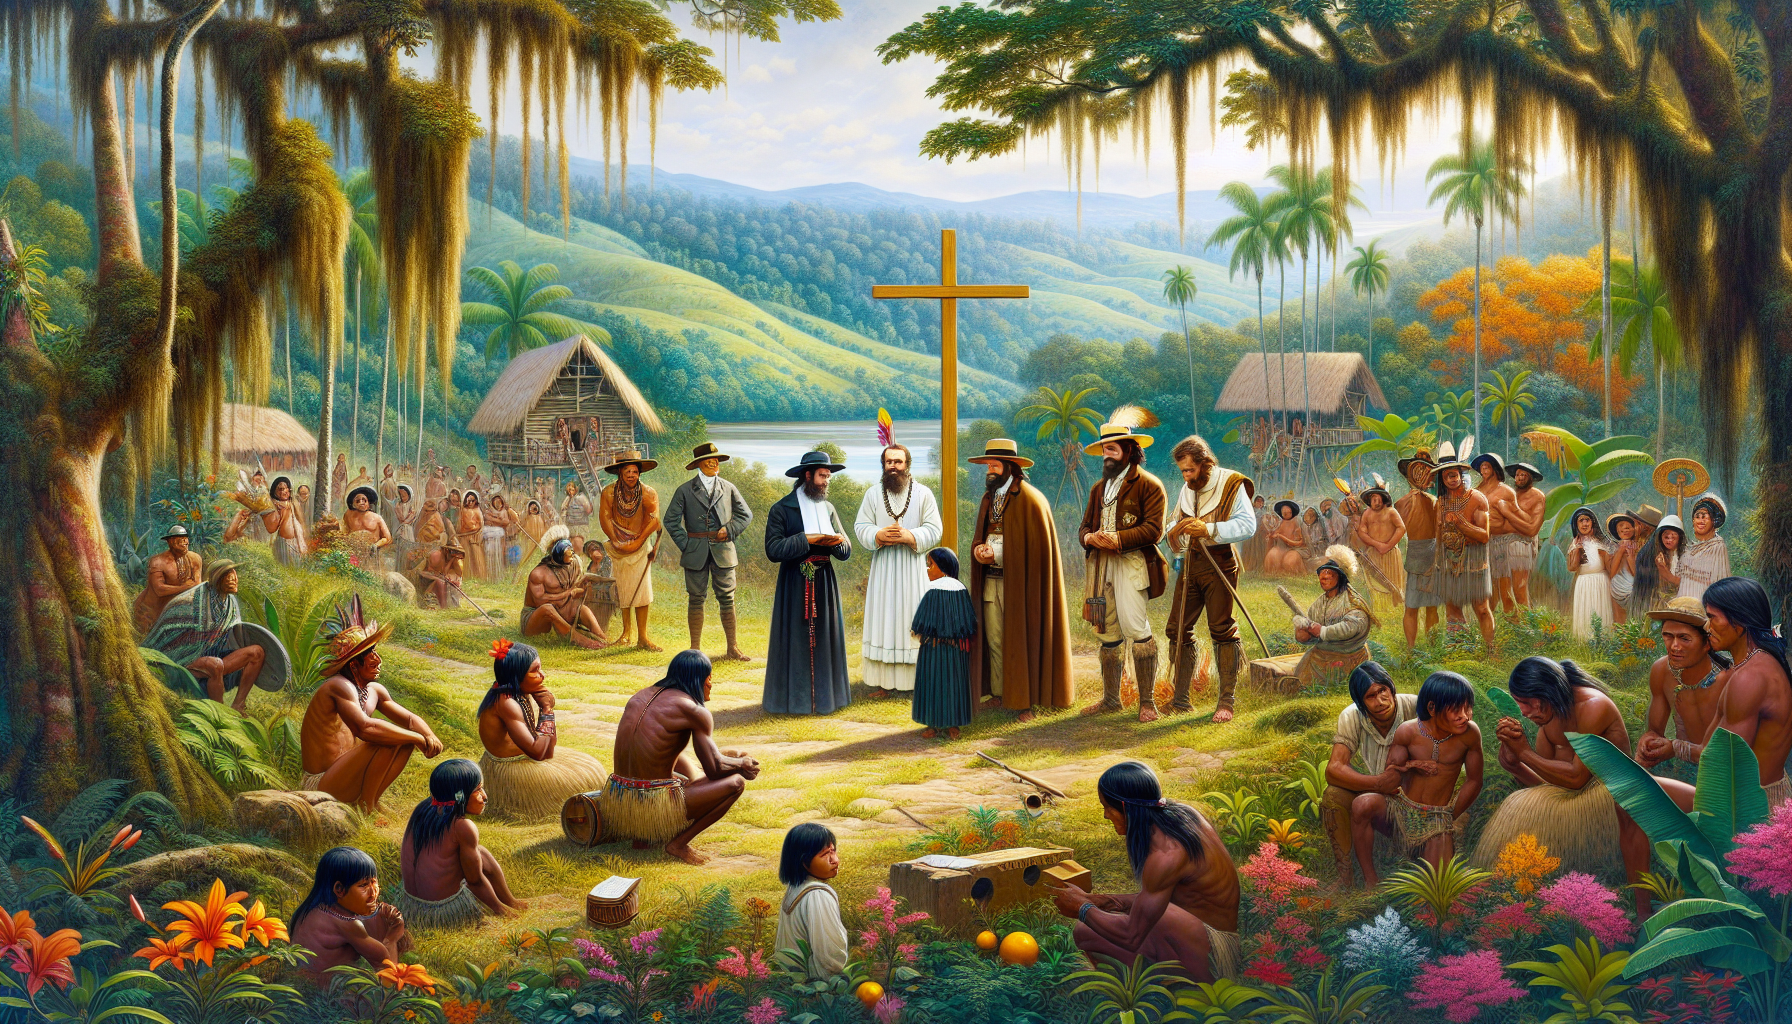 Artistic representation of early Christian missionaries preaching to indigenous Colombian tribes in a lush Andean landscape, surrounded by Colombian flora and fauna, with a small wooden cross being er